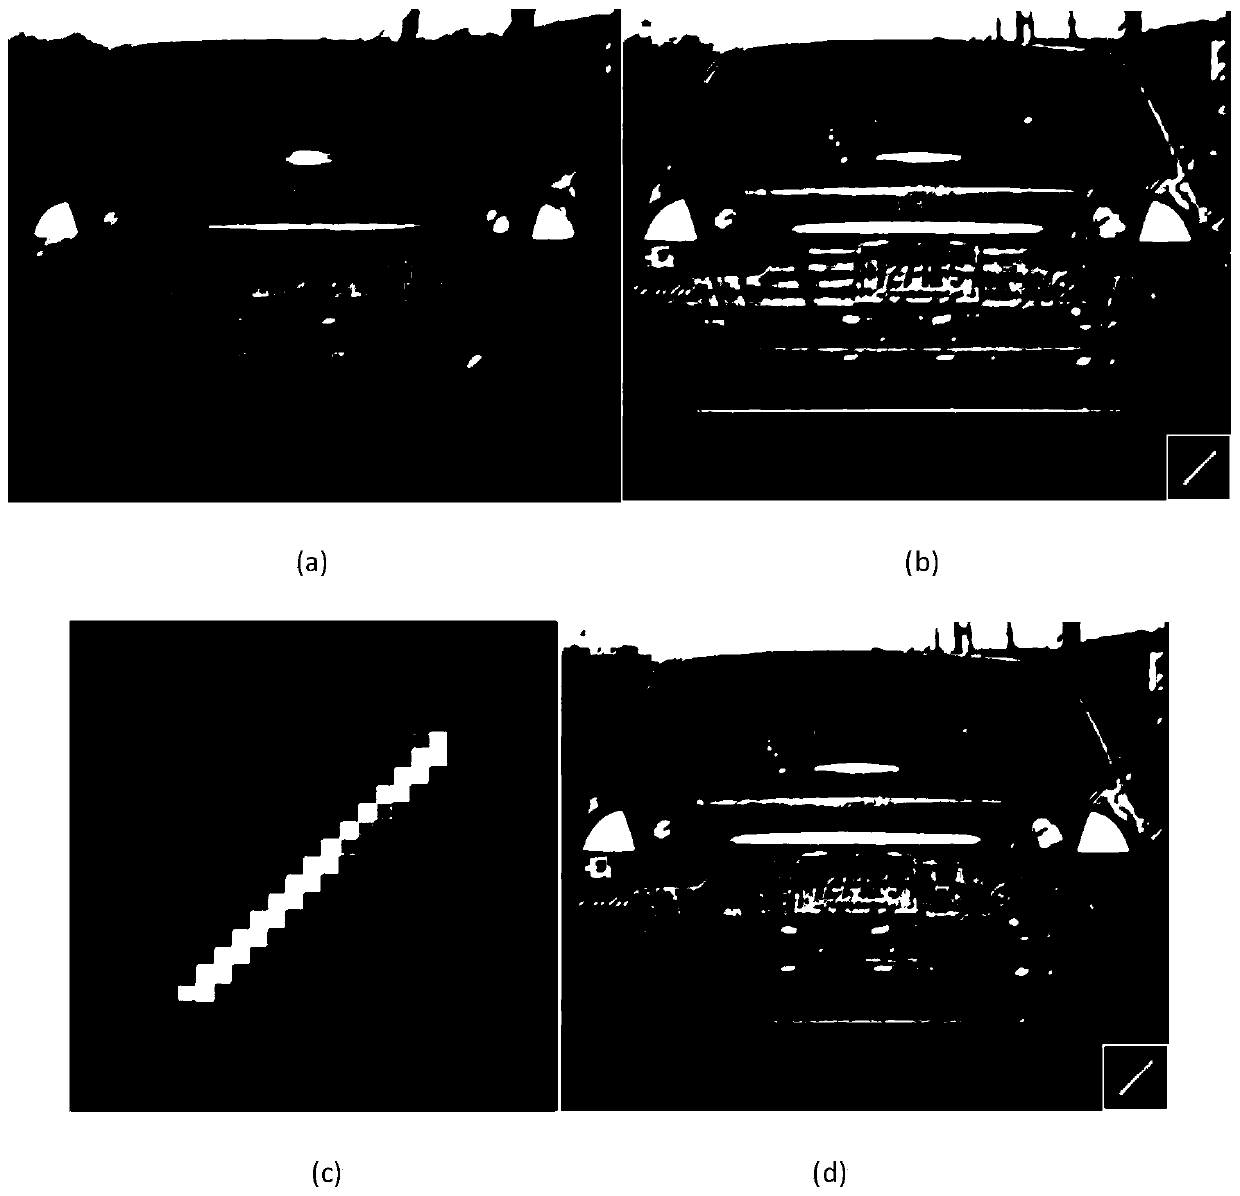 A Single Image Blind Motion Blur Removal Method Based on Fuzzy Kernel Refinement